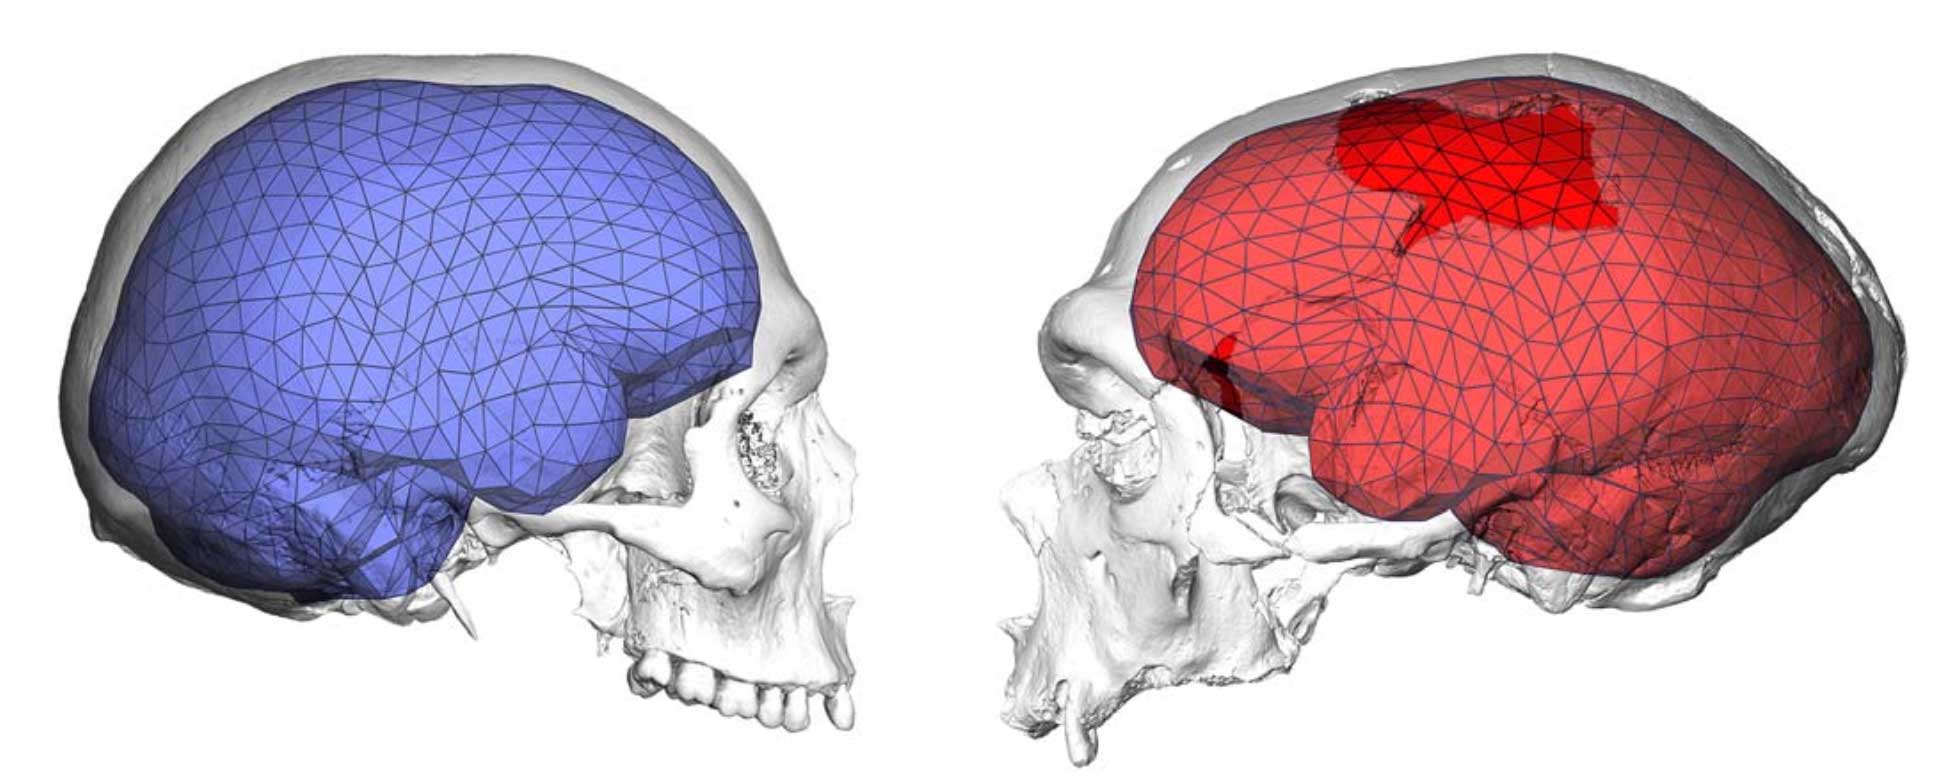 Semi-transparent images of a recent human skull and Neandertal skull with the endocranial shape indicated in blue and red.